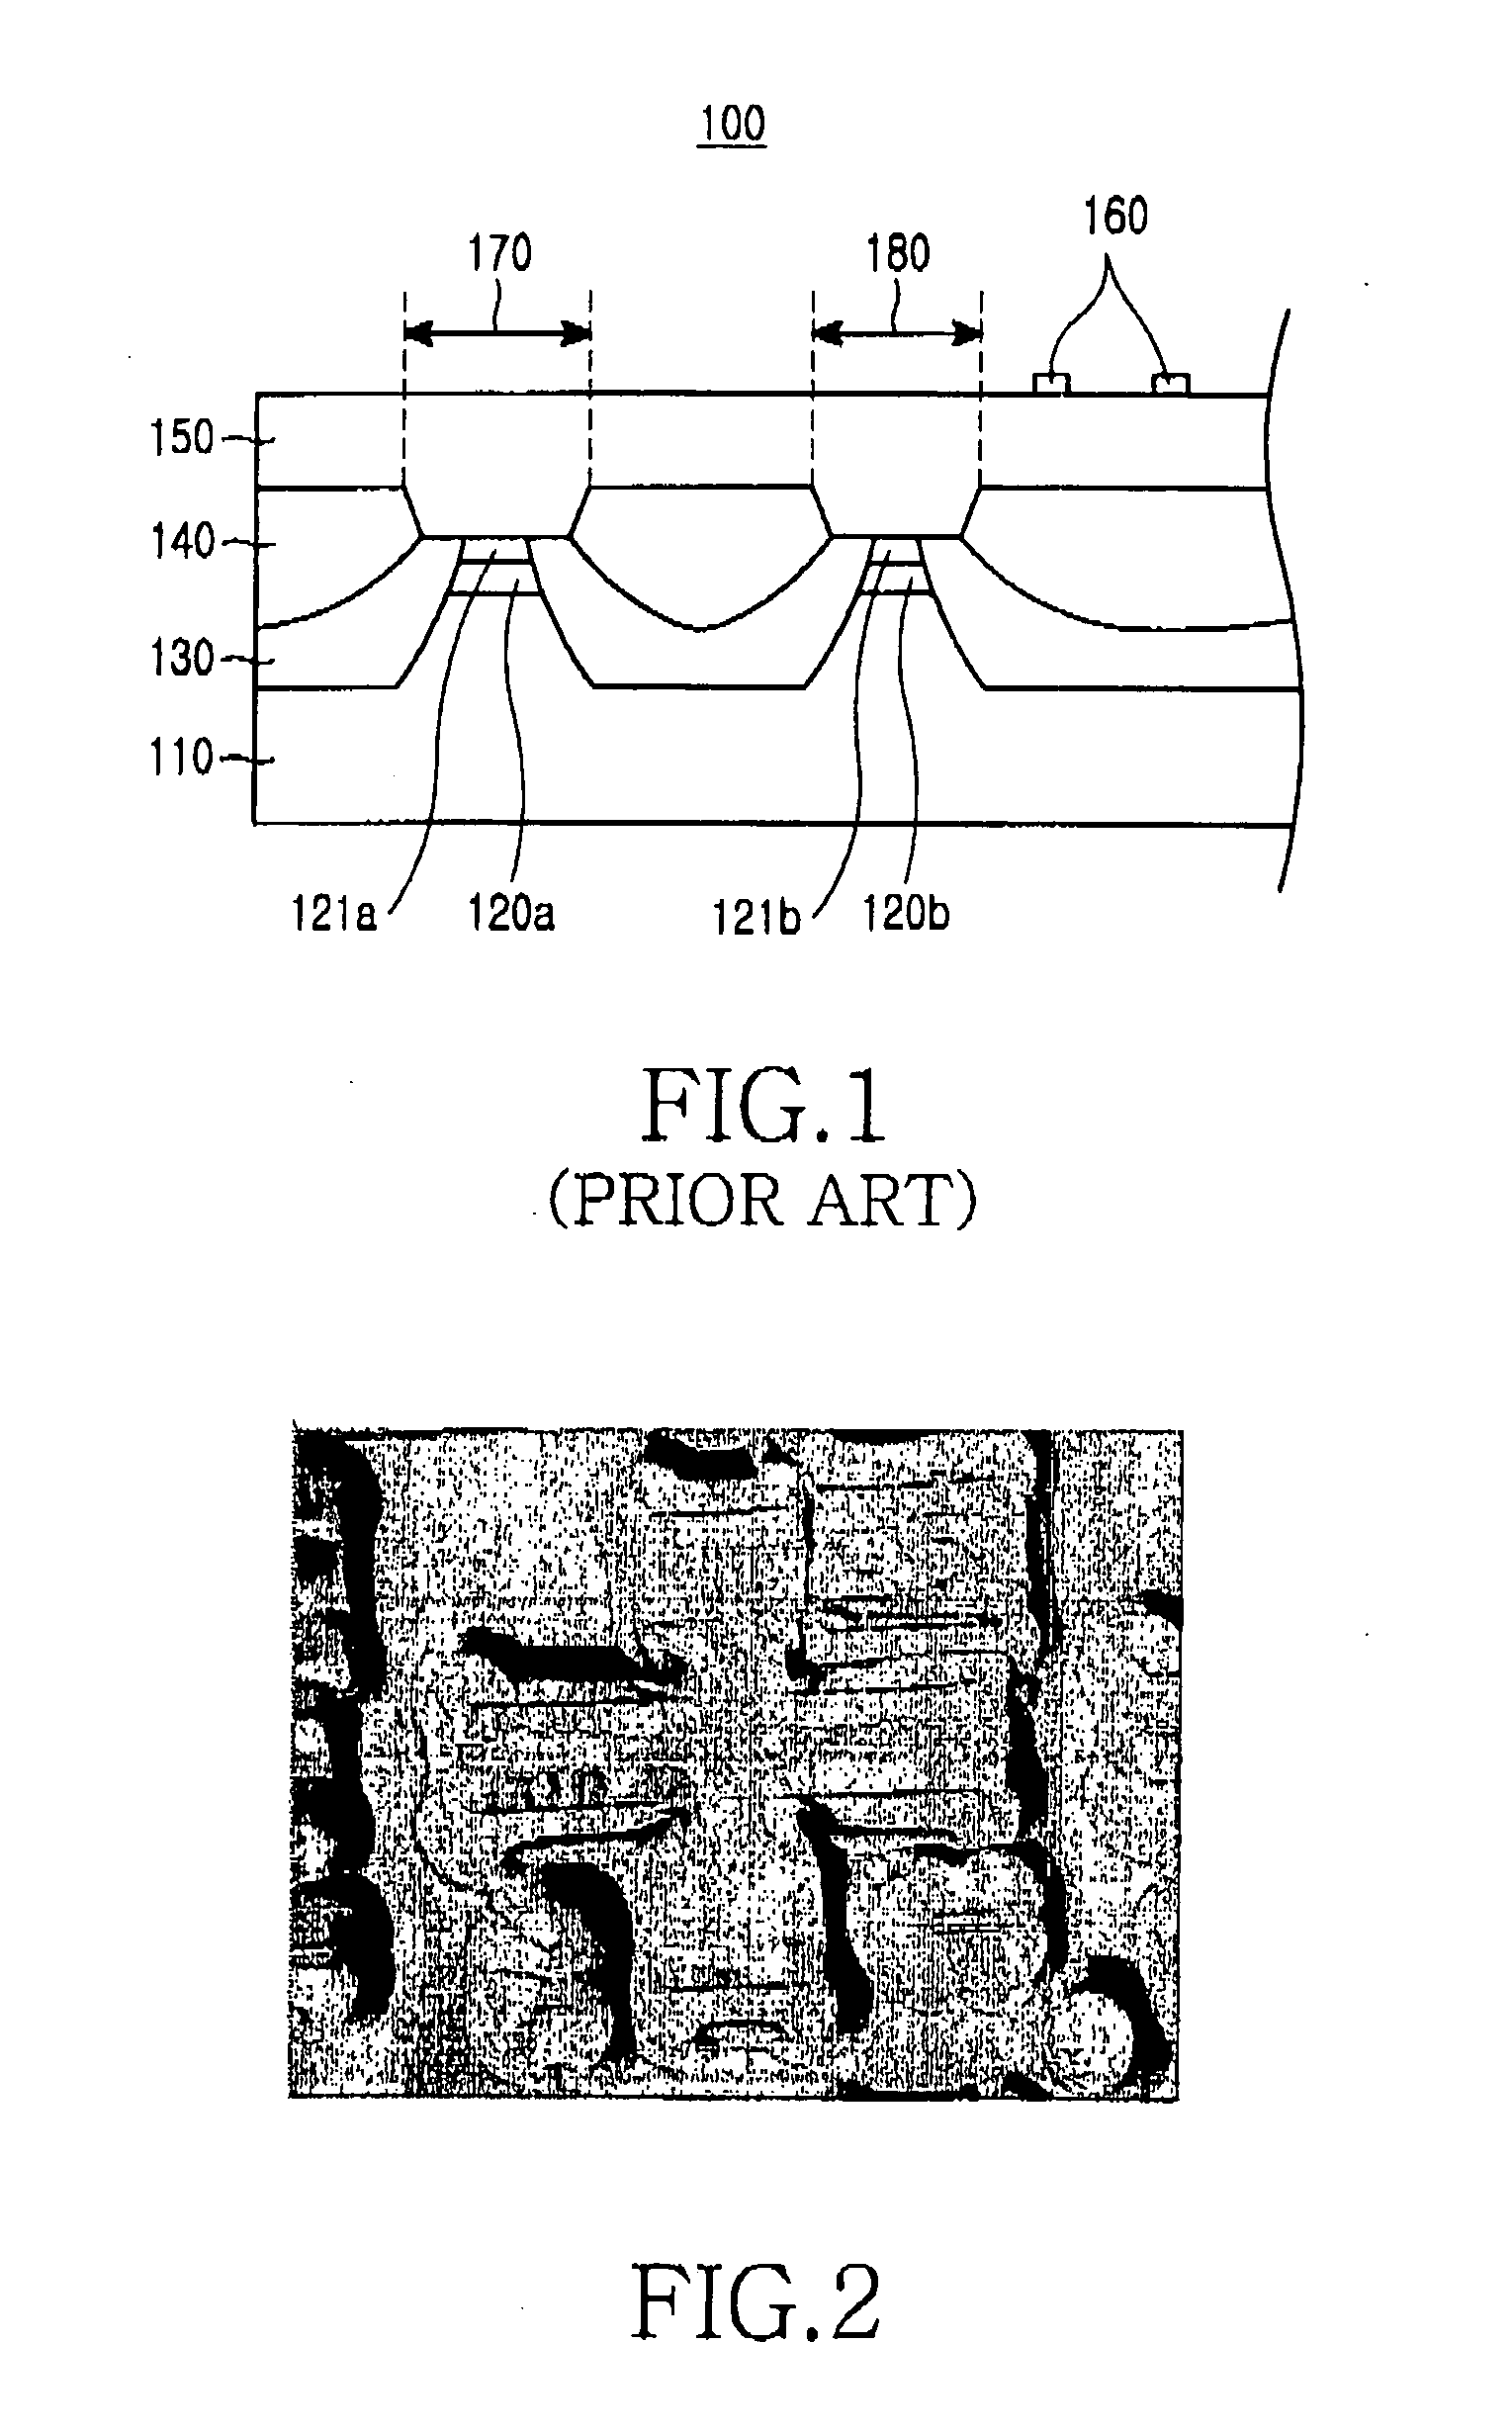 Fabricating method of semiconductor optical device for flip-chip bonding